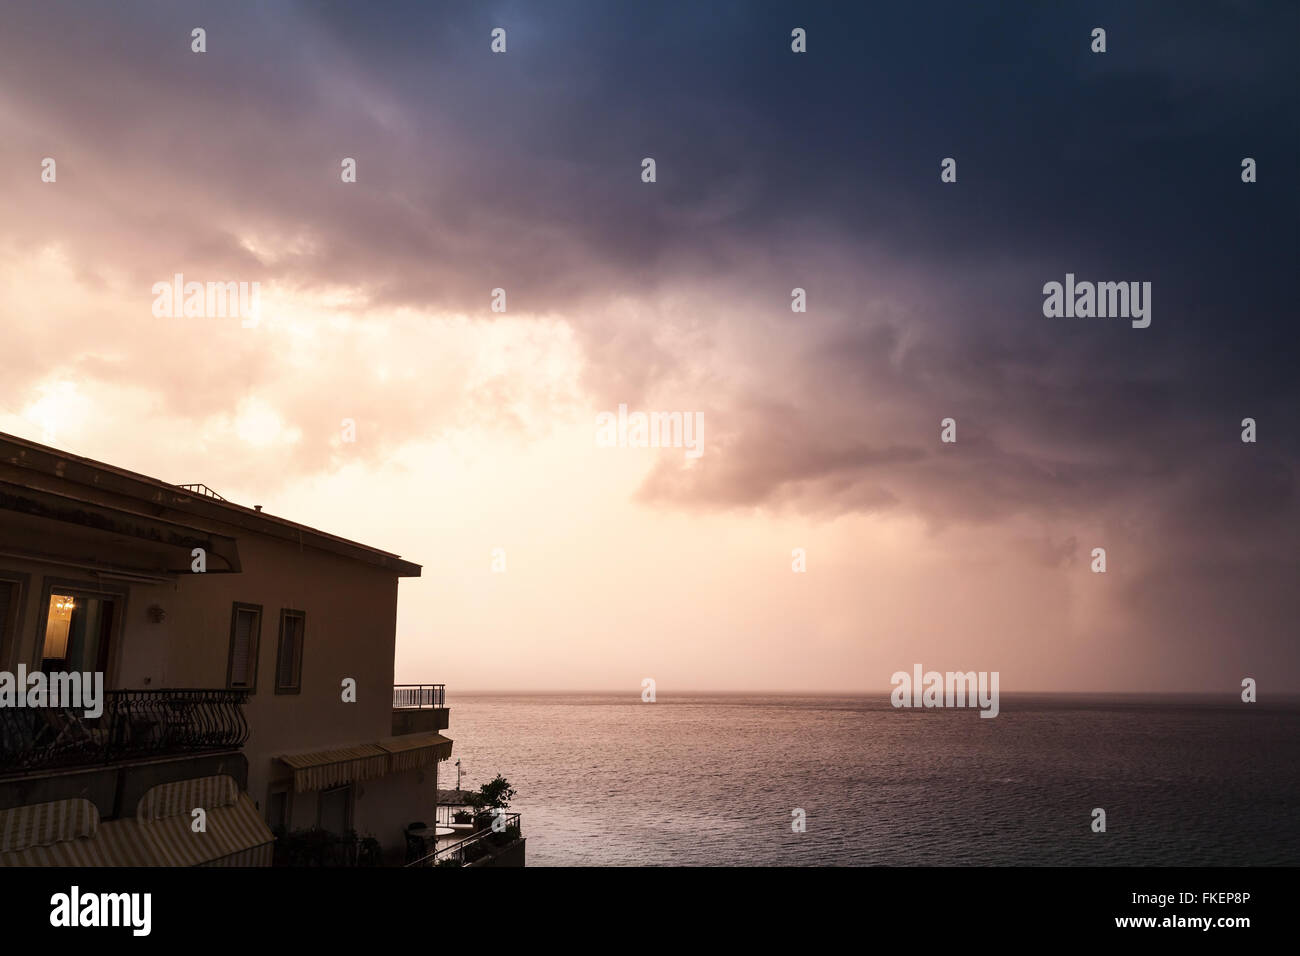 Coastal morning landscape with cloudy sky and living house. Ischia island, Italy Stock Photo